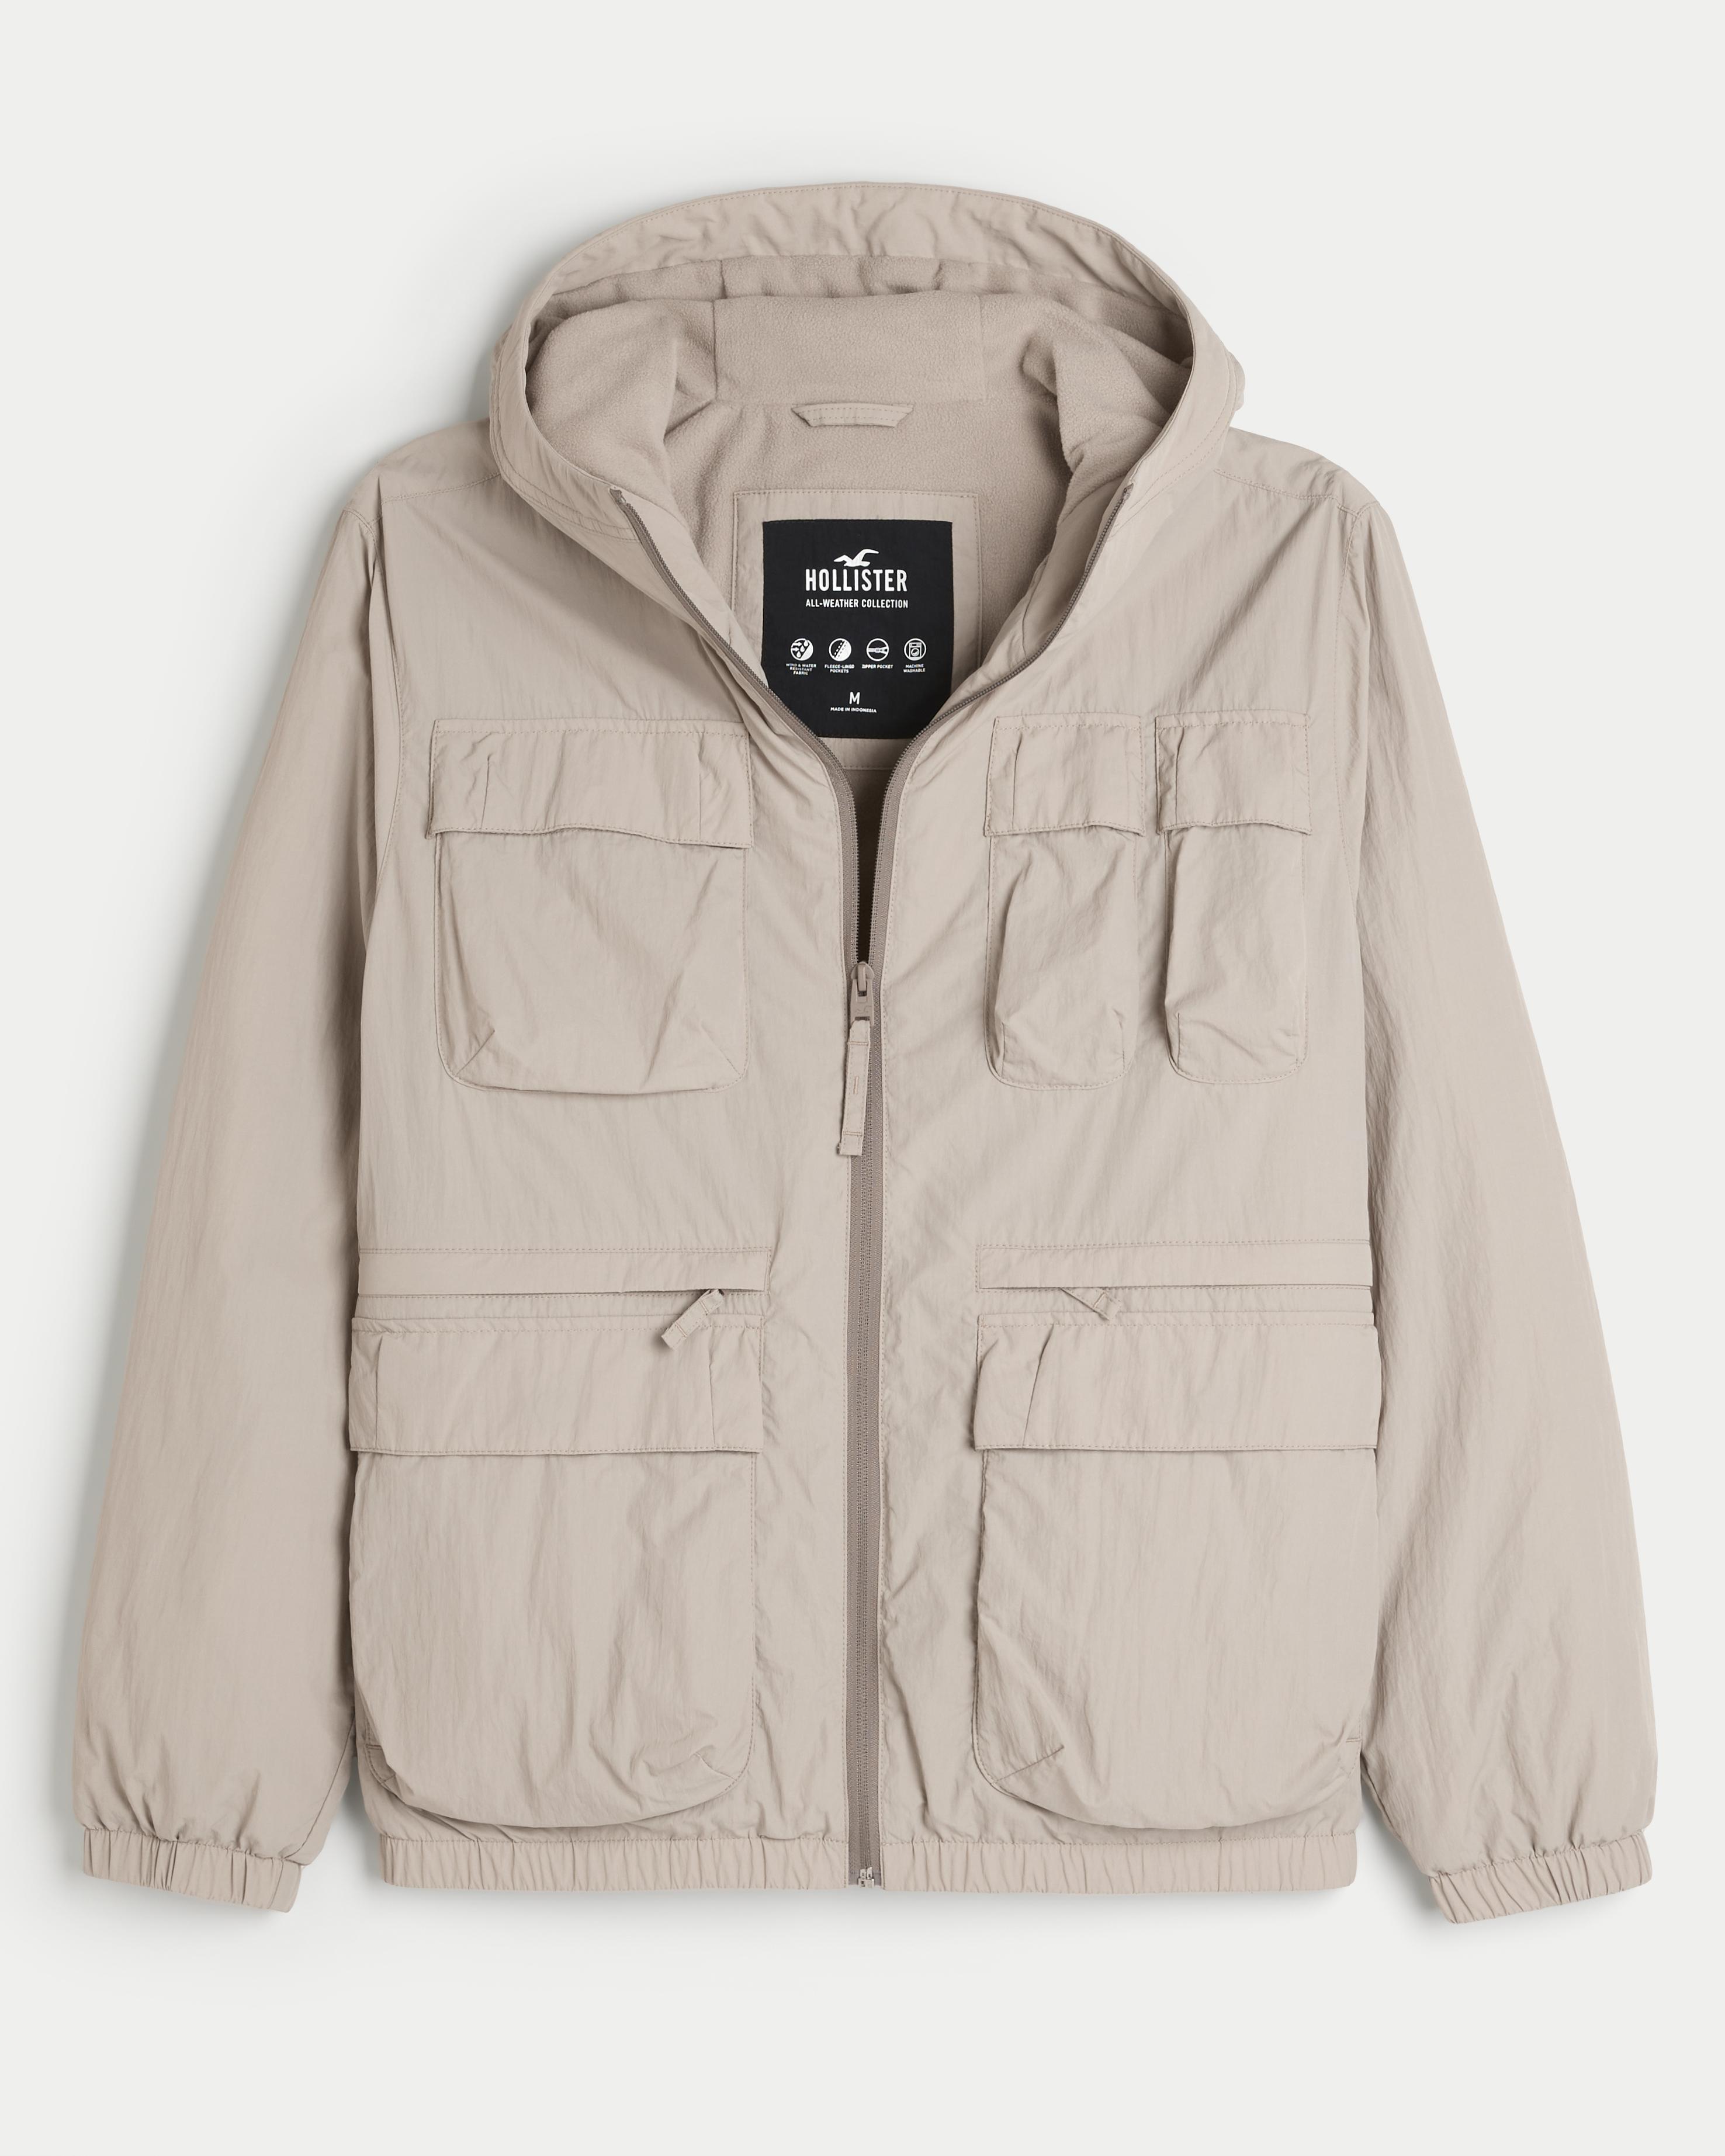 Hollister Fleece-lined All-weather Hoodie Jacket in Natural for